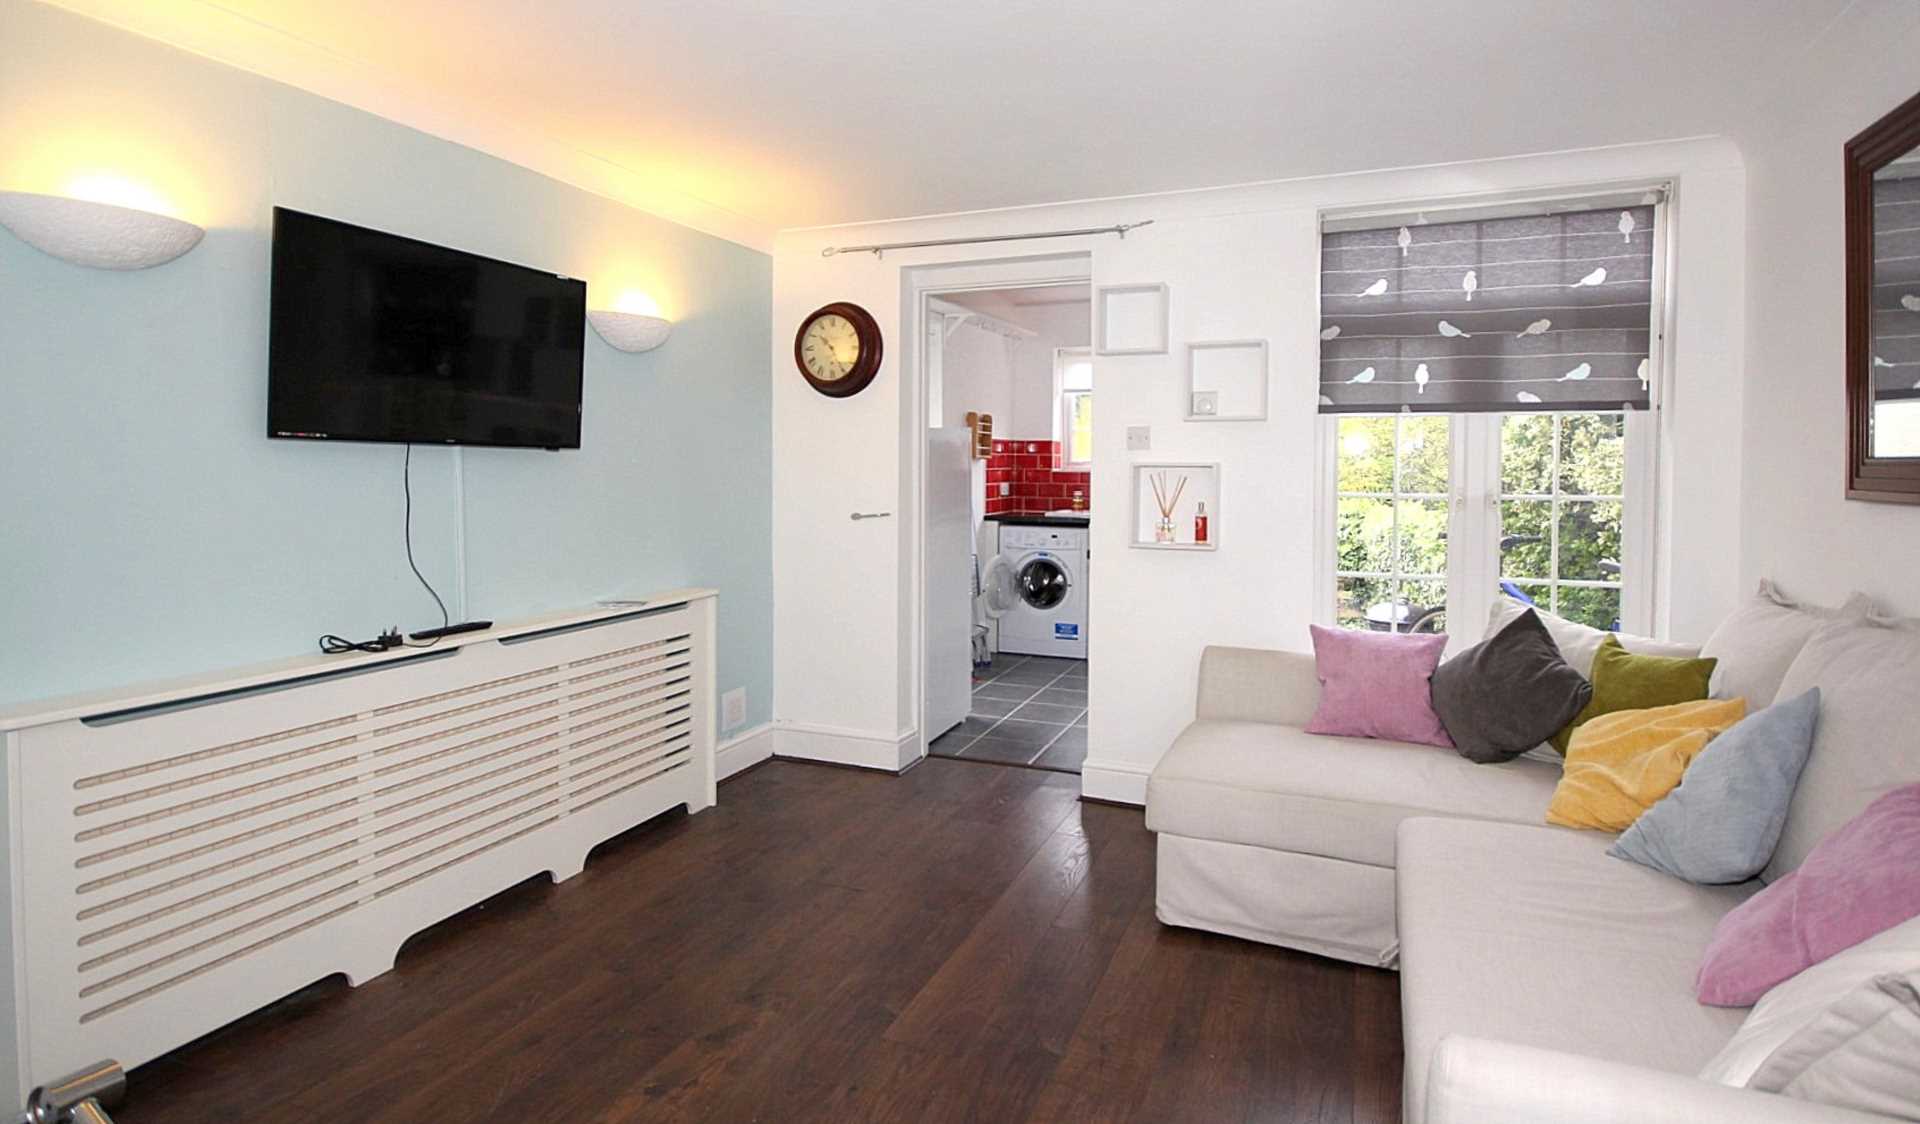 SUPERBLY PRESENTED AND PROPORTIONED DUPLEX MAISONETTE WITH STUDY AREA AND LARGE GARDEN, Image 2